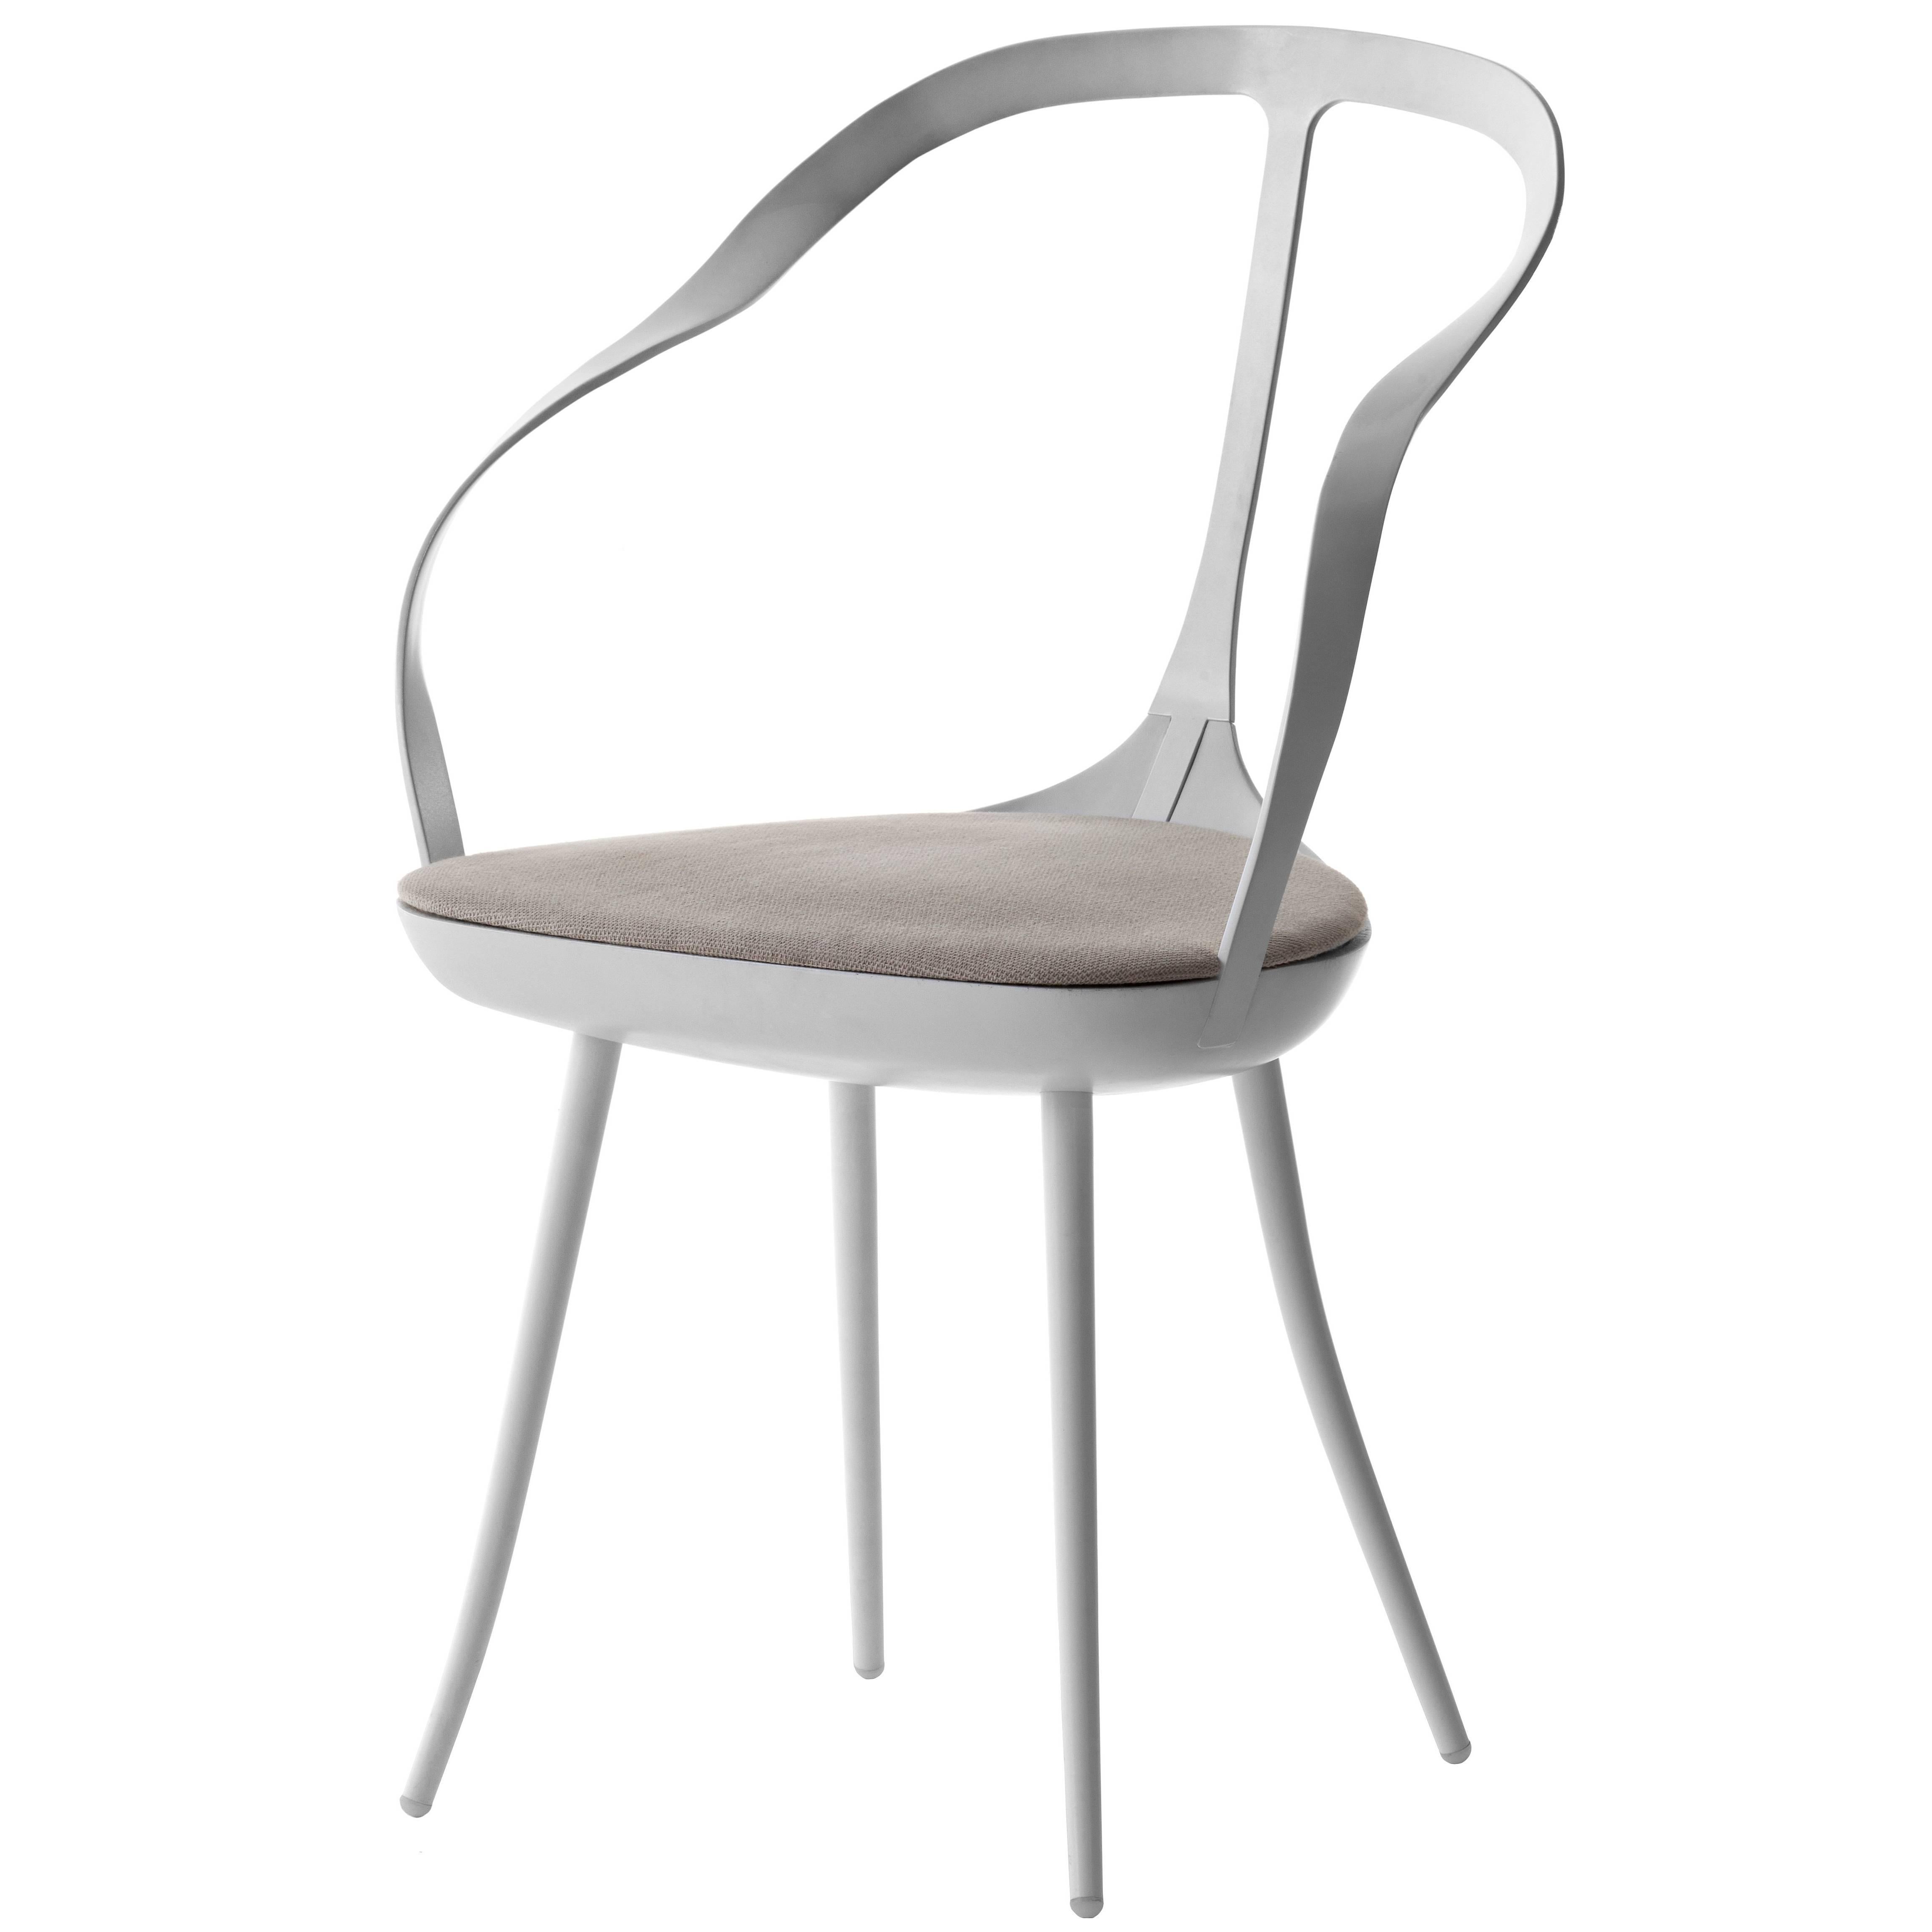 "Mollina" Shaped Steel Plate Chair Designed by Park Associati for Driade